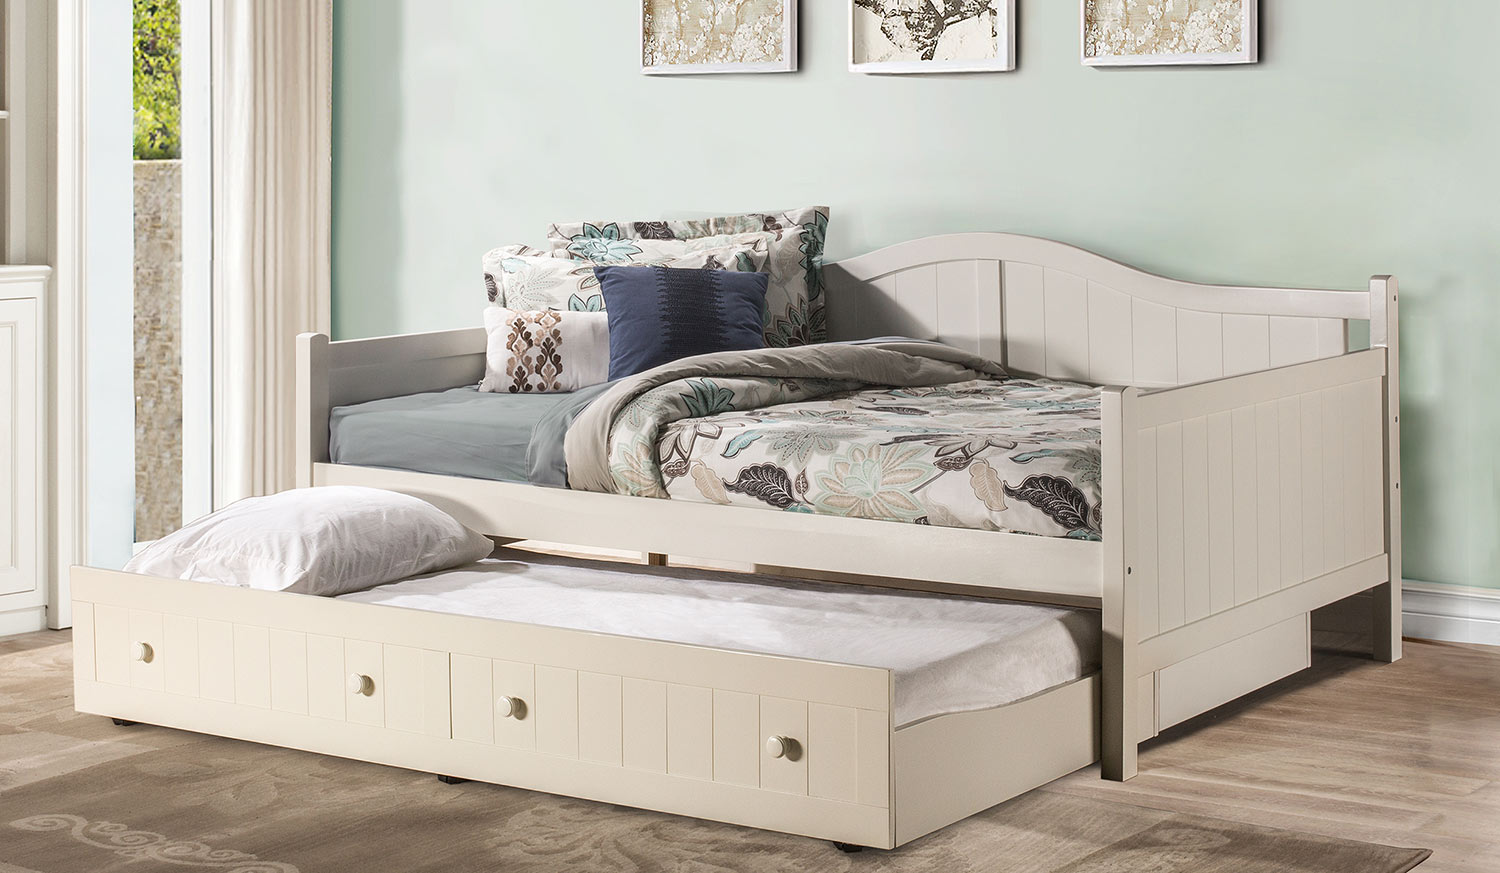 Hillsdale Staci Daybed with Trundle - Full - White